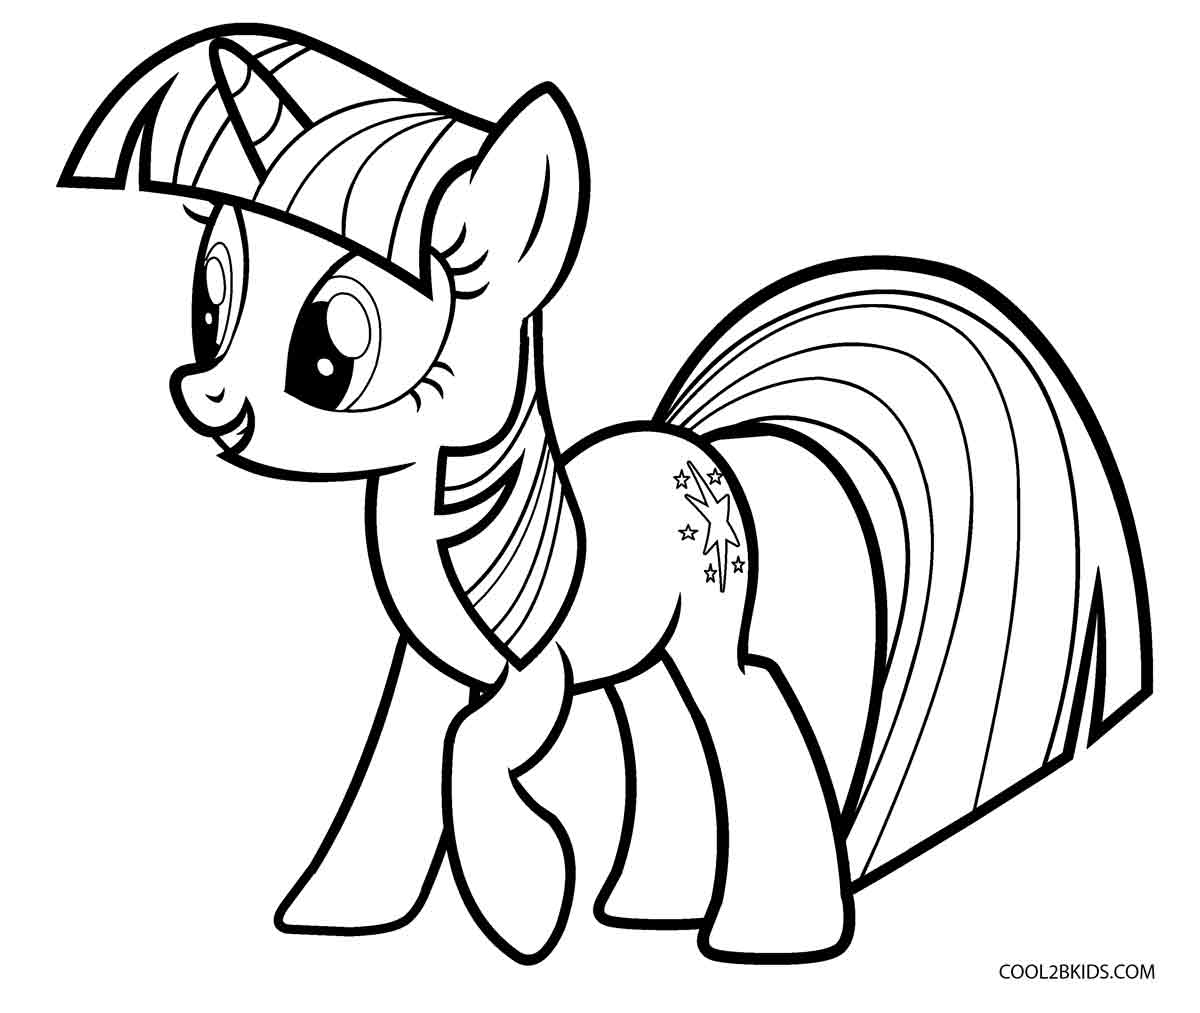 Free Printable My Little Pony Coloring Pages For Kids Cool2Bkids - Free Printable My Little Pony Coloring Pages